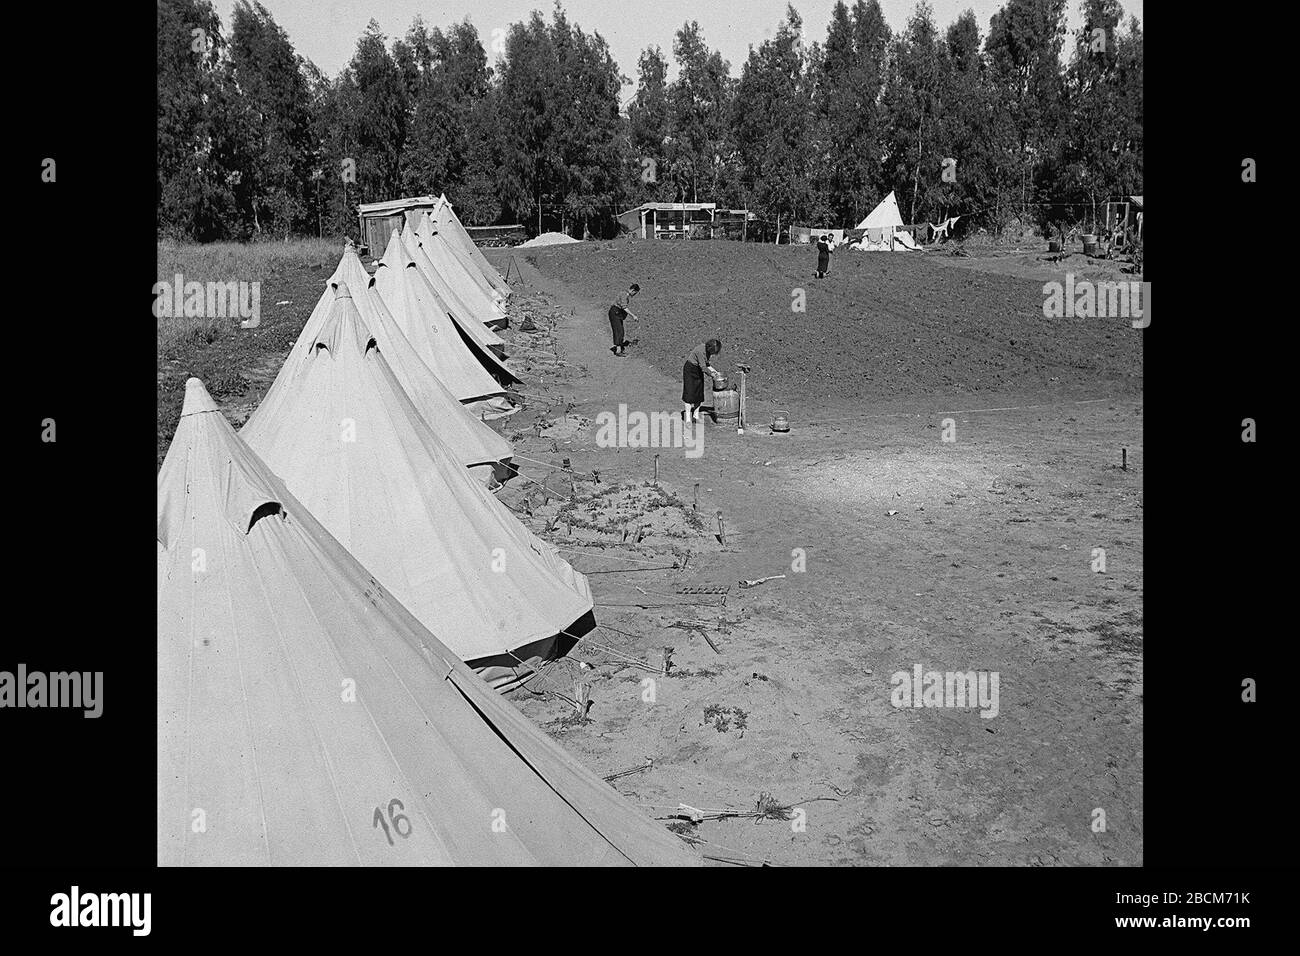 English Tents At The Kfar Vitkin Immigrants Camp E I I U O U E U O I I I U O U O I O Ss O U February 1940 This Is Available From National Photo Collection Of Israel Photography Dept Goverment Press